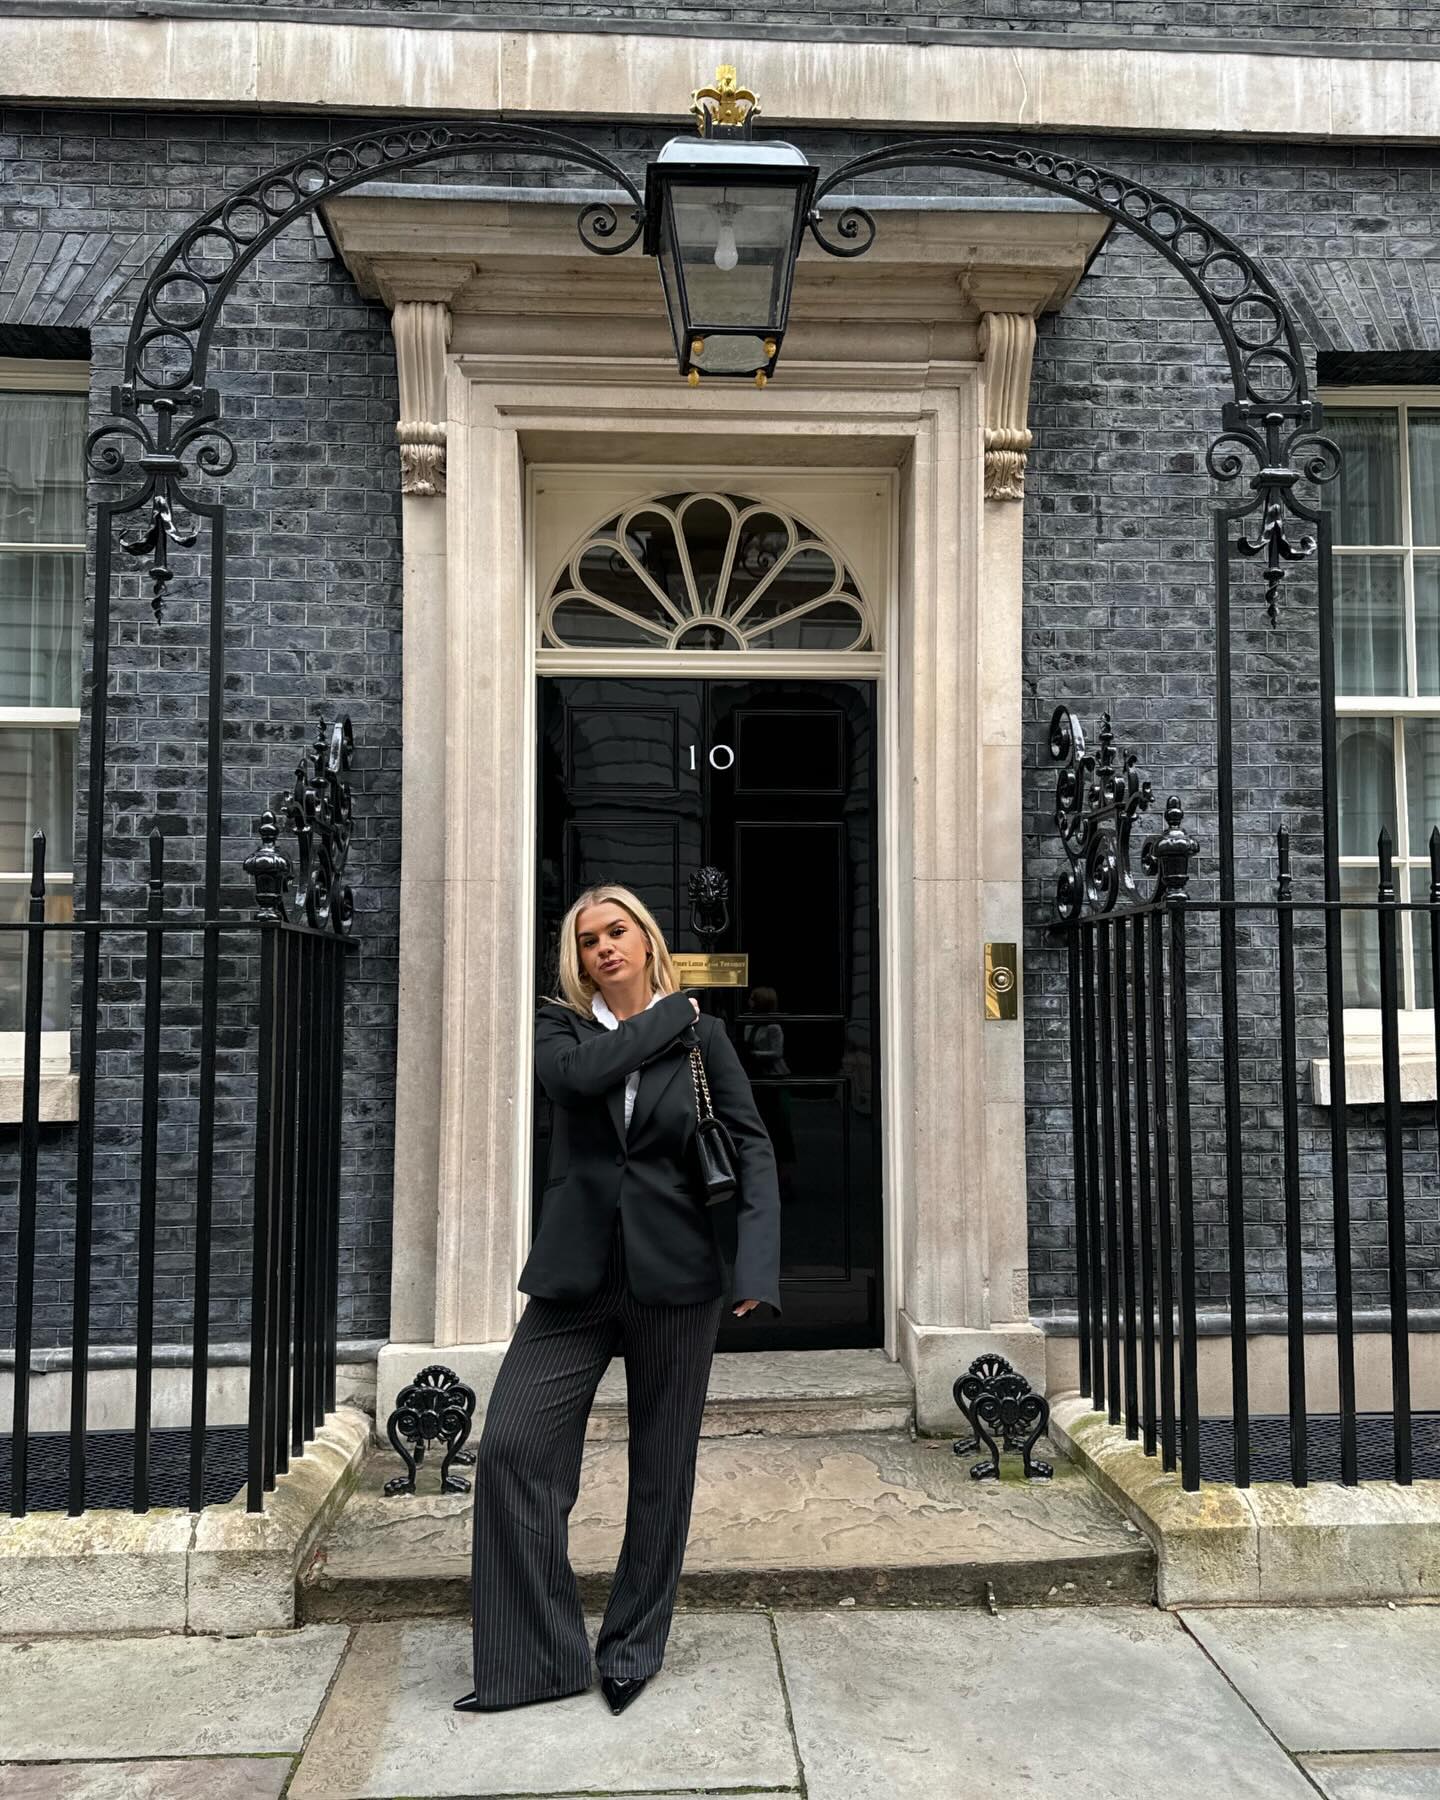 Grace's campaigning work has even taken her to Number 10, Downing Street